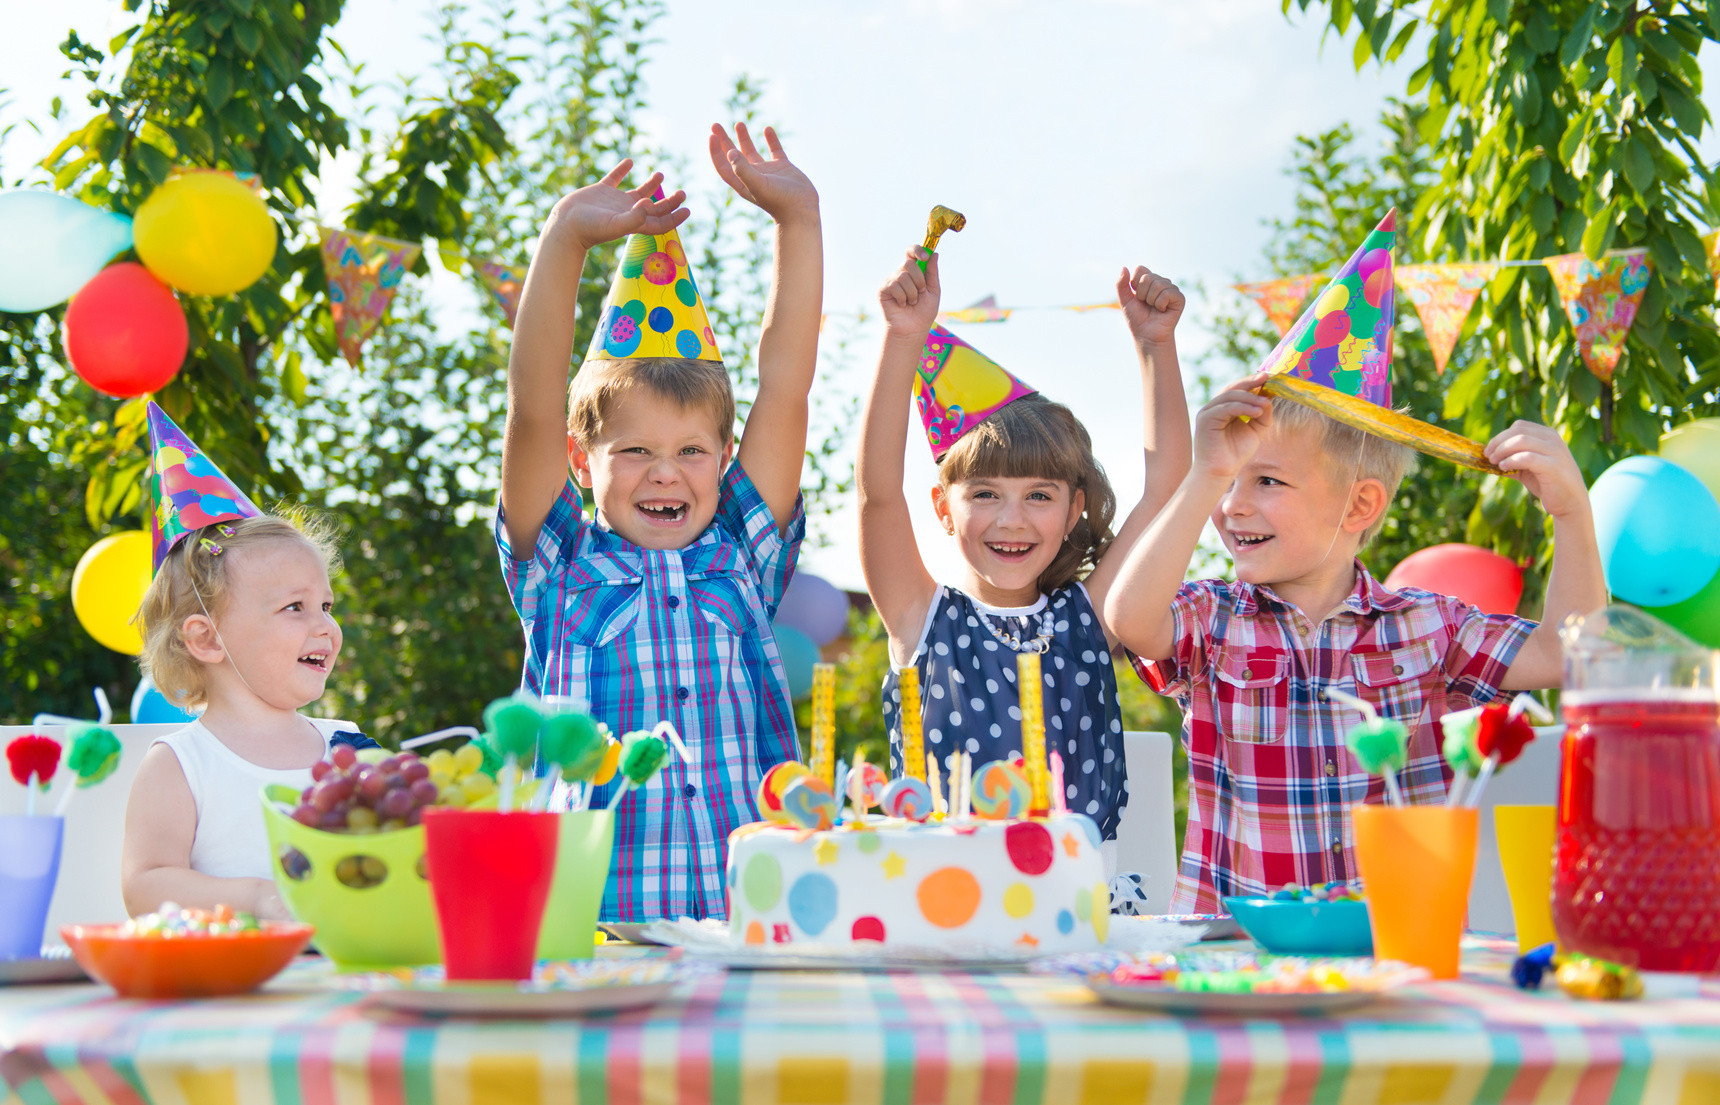 Birthday Party Entertainment For Kids
 Hire Children s Entertainment & Kids Party Entertainers